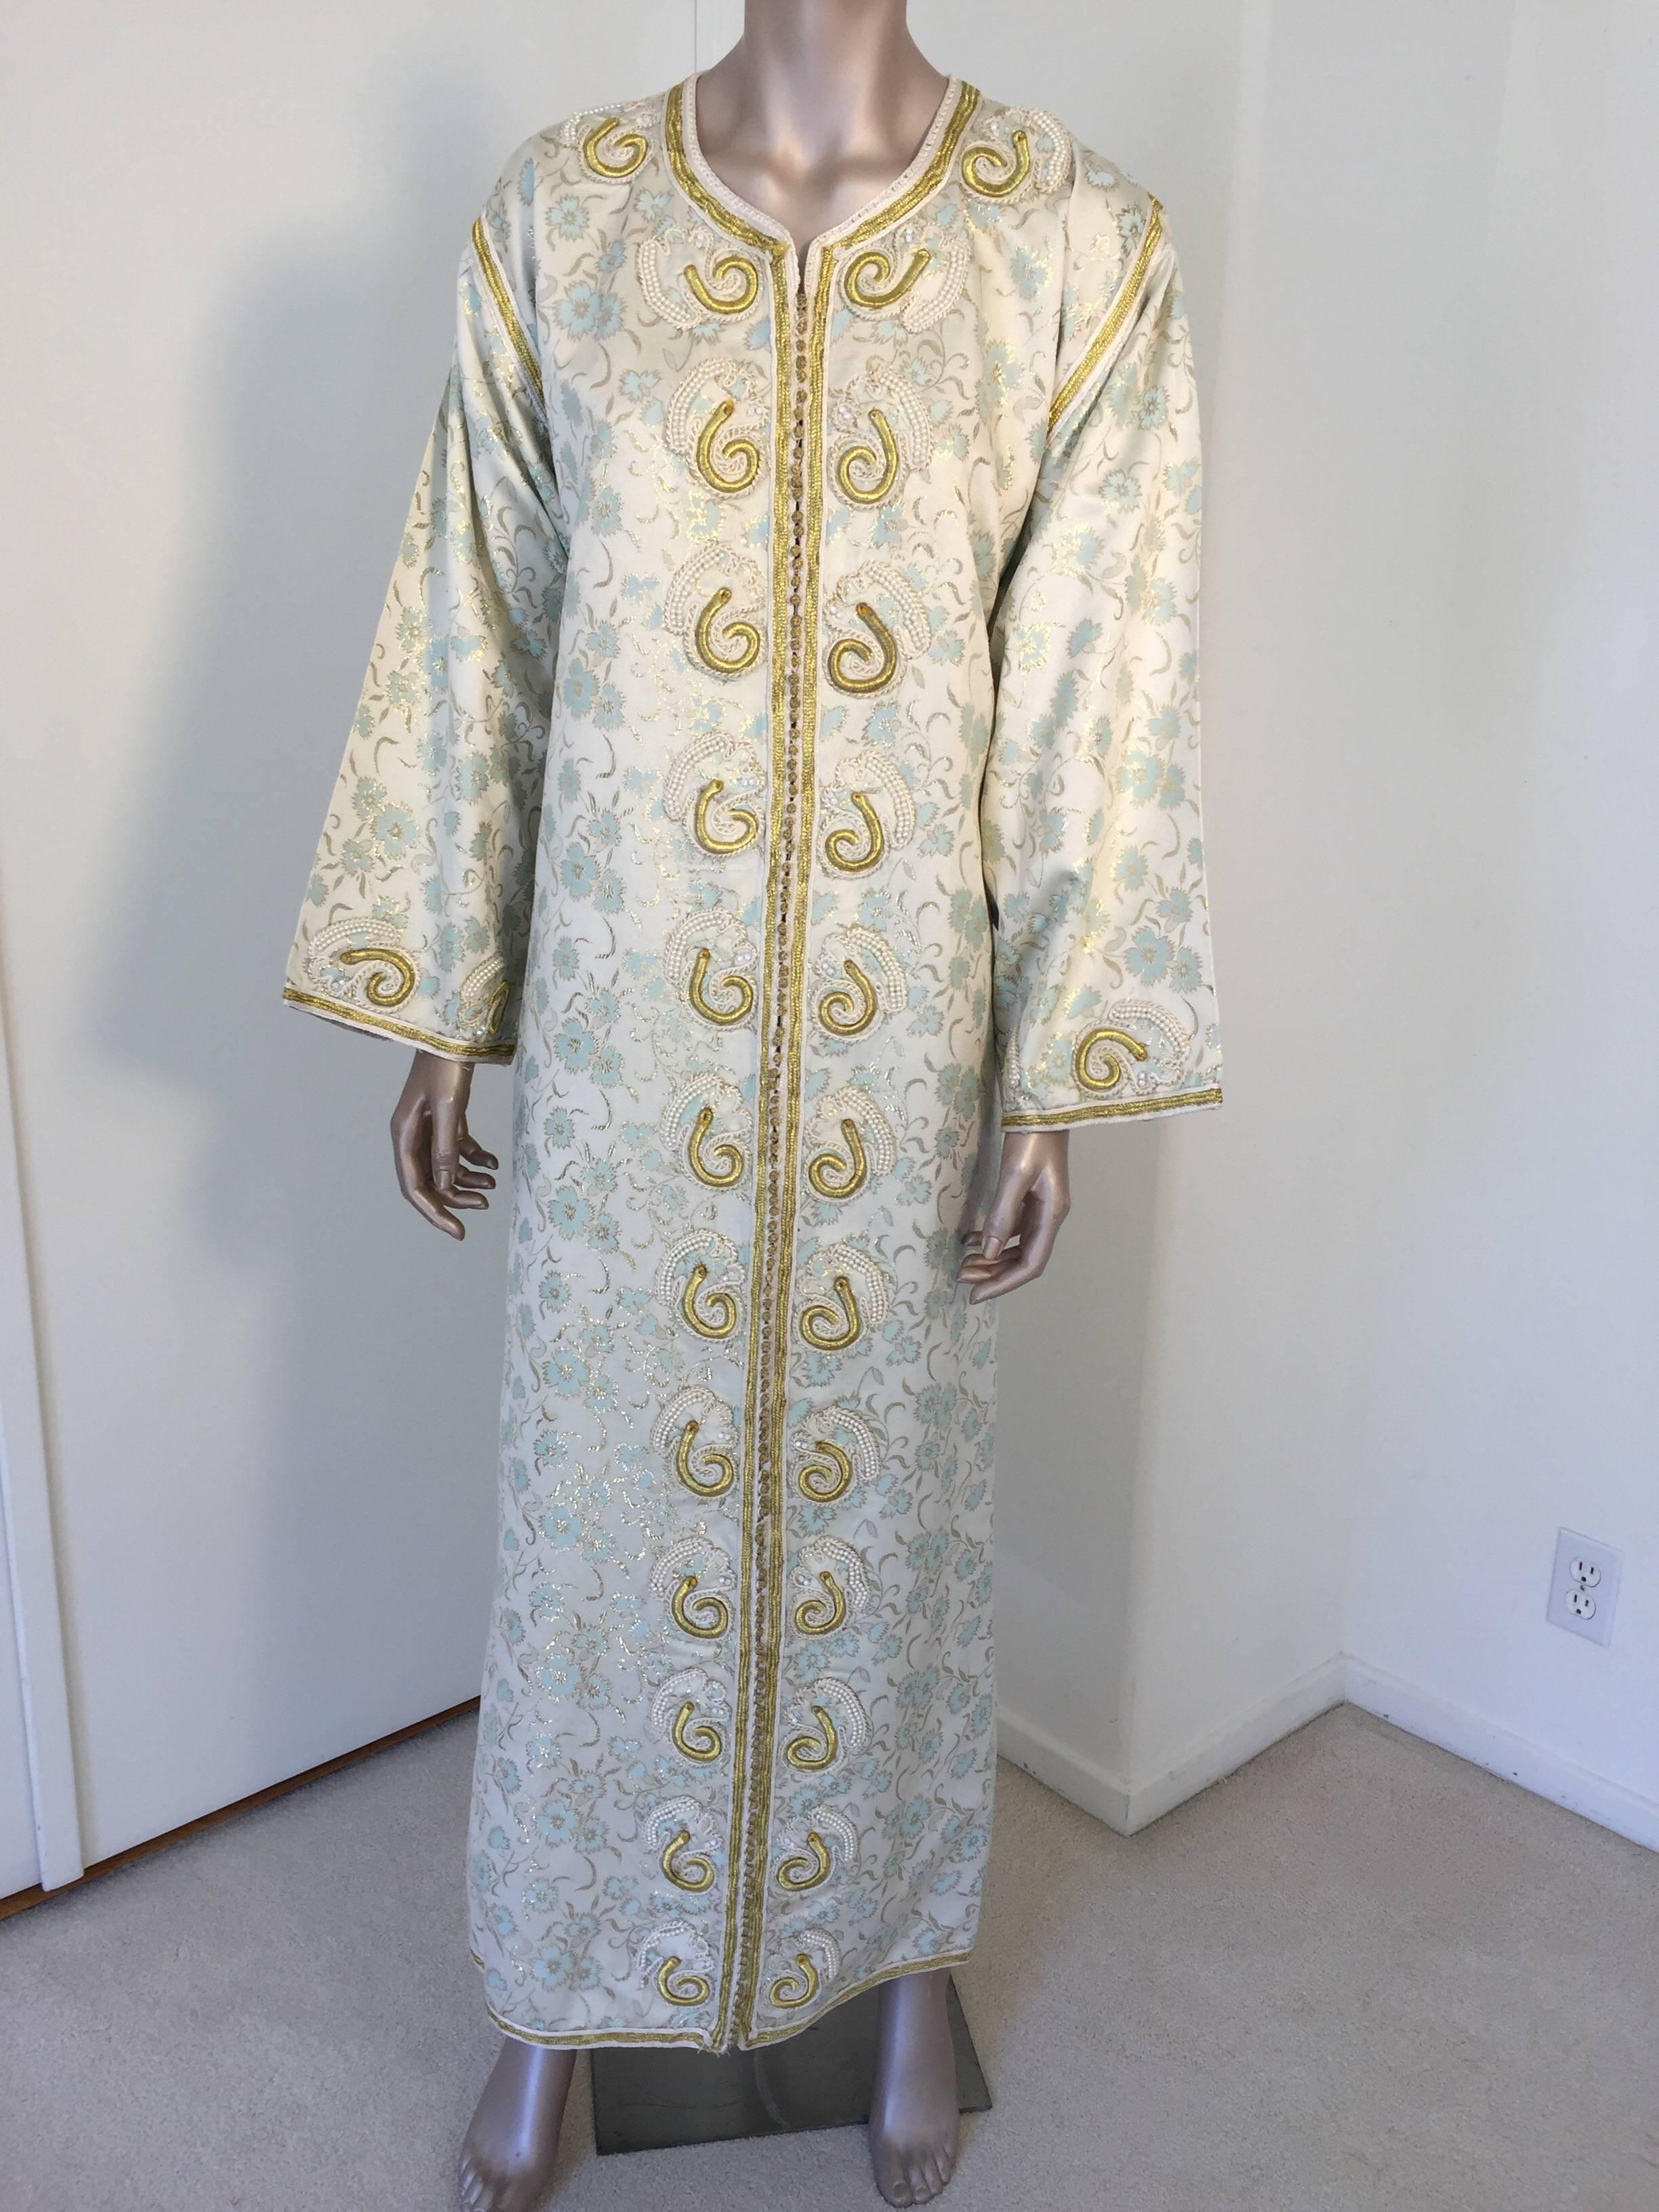 Elegant vintage designer Moroccan white brocade kaftan, embroidered with Turkish gold threads design. 
This chic Bohemian white, gold and light turquoise blue floral brocade maxi dress kaftan is embroidered and embellished with gold thread metallic